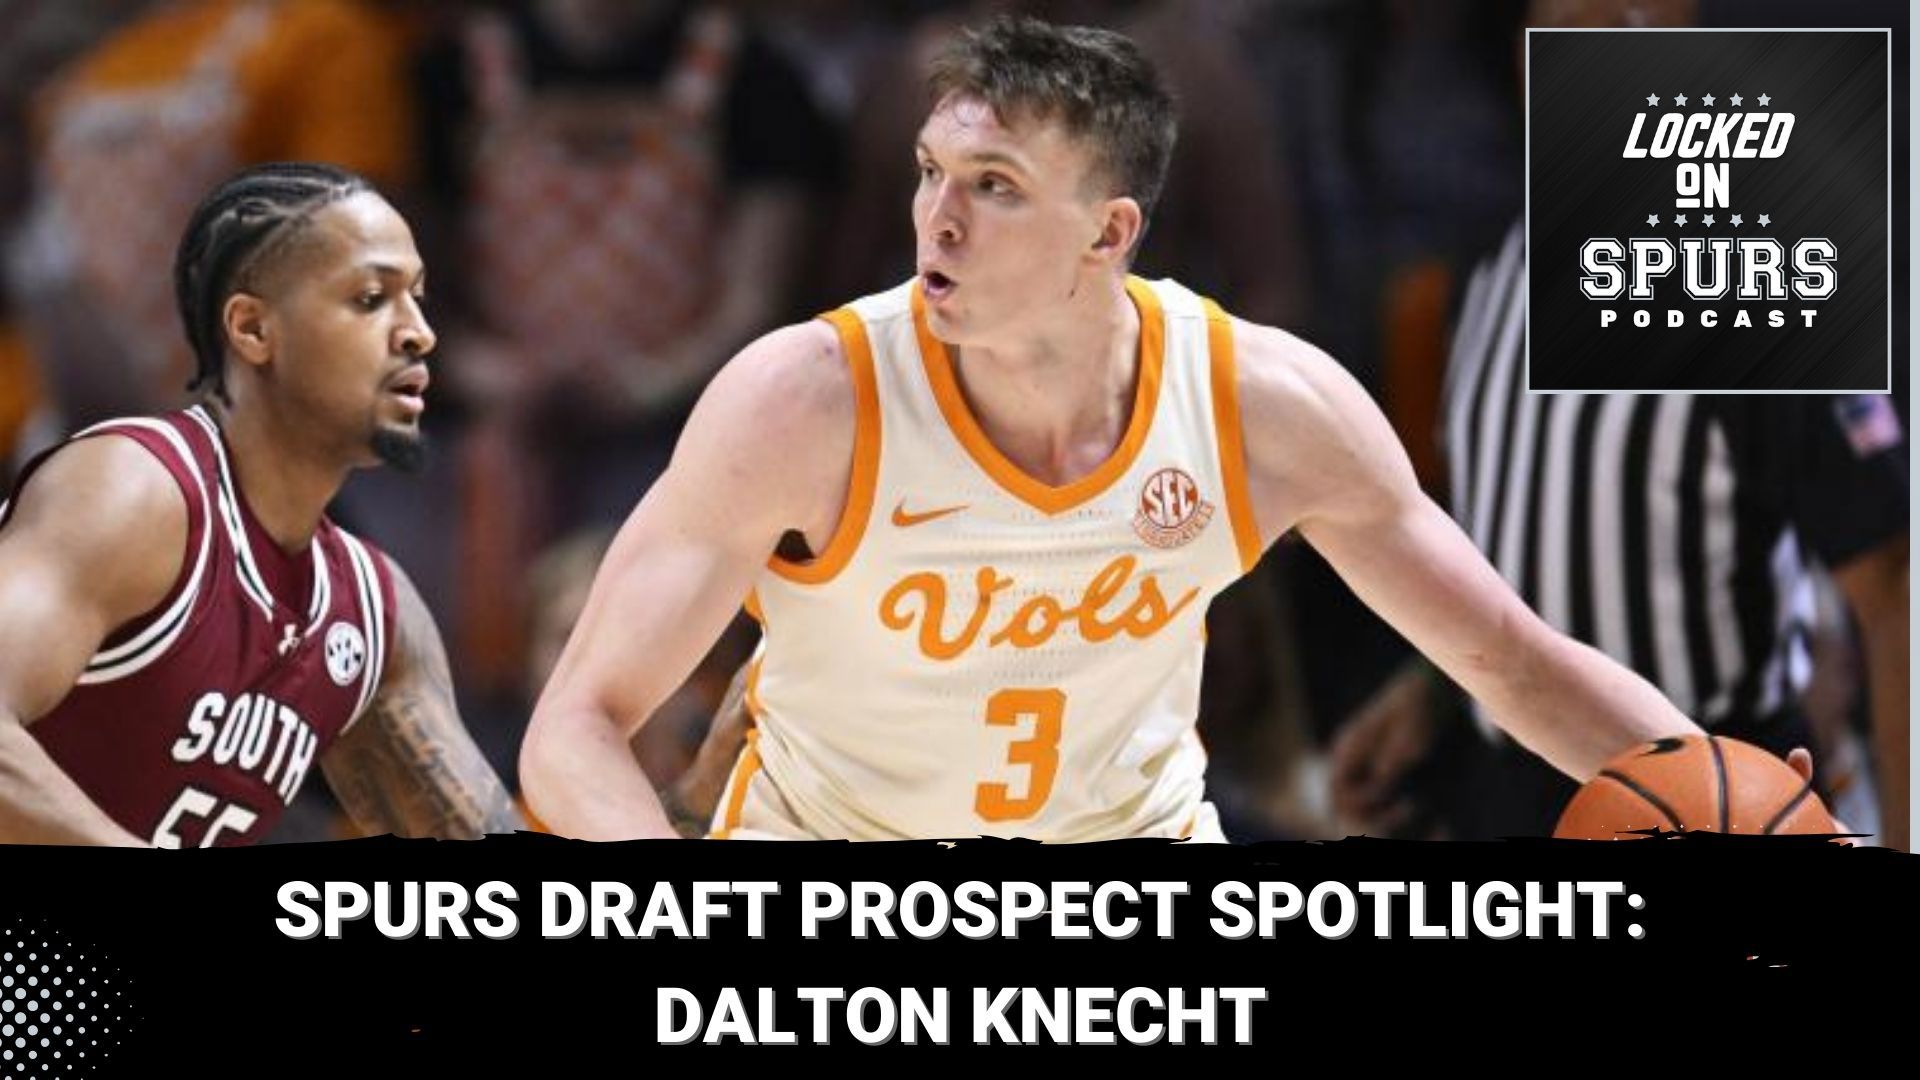 Should the Spurs look to select Knecht with one of their two first-round picks in the NBA Draft?